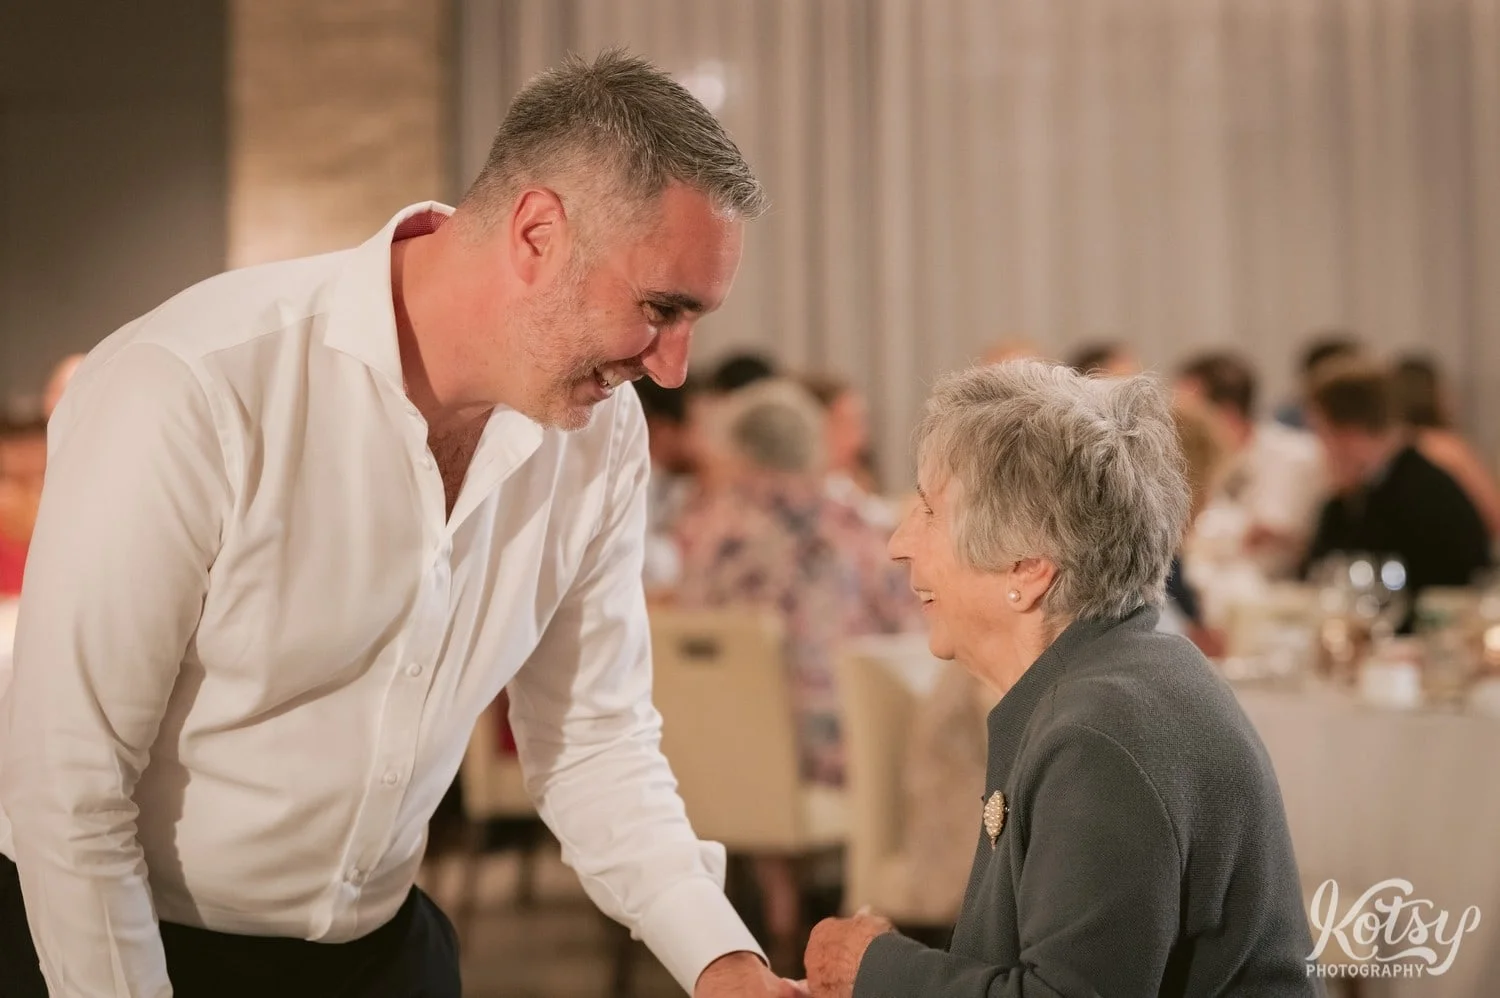 A man smiles as he speaks to his grandmother while holding his hand at a Village Loft wedding reception in Toronto, Canada